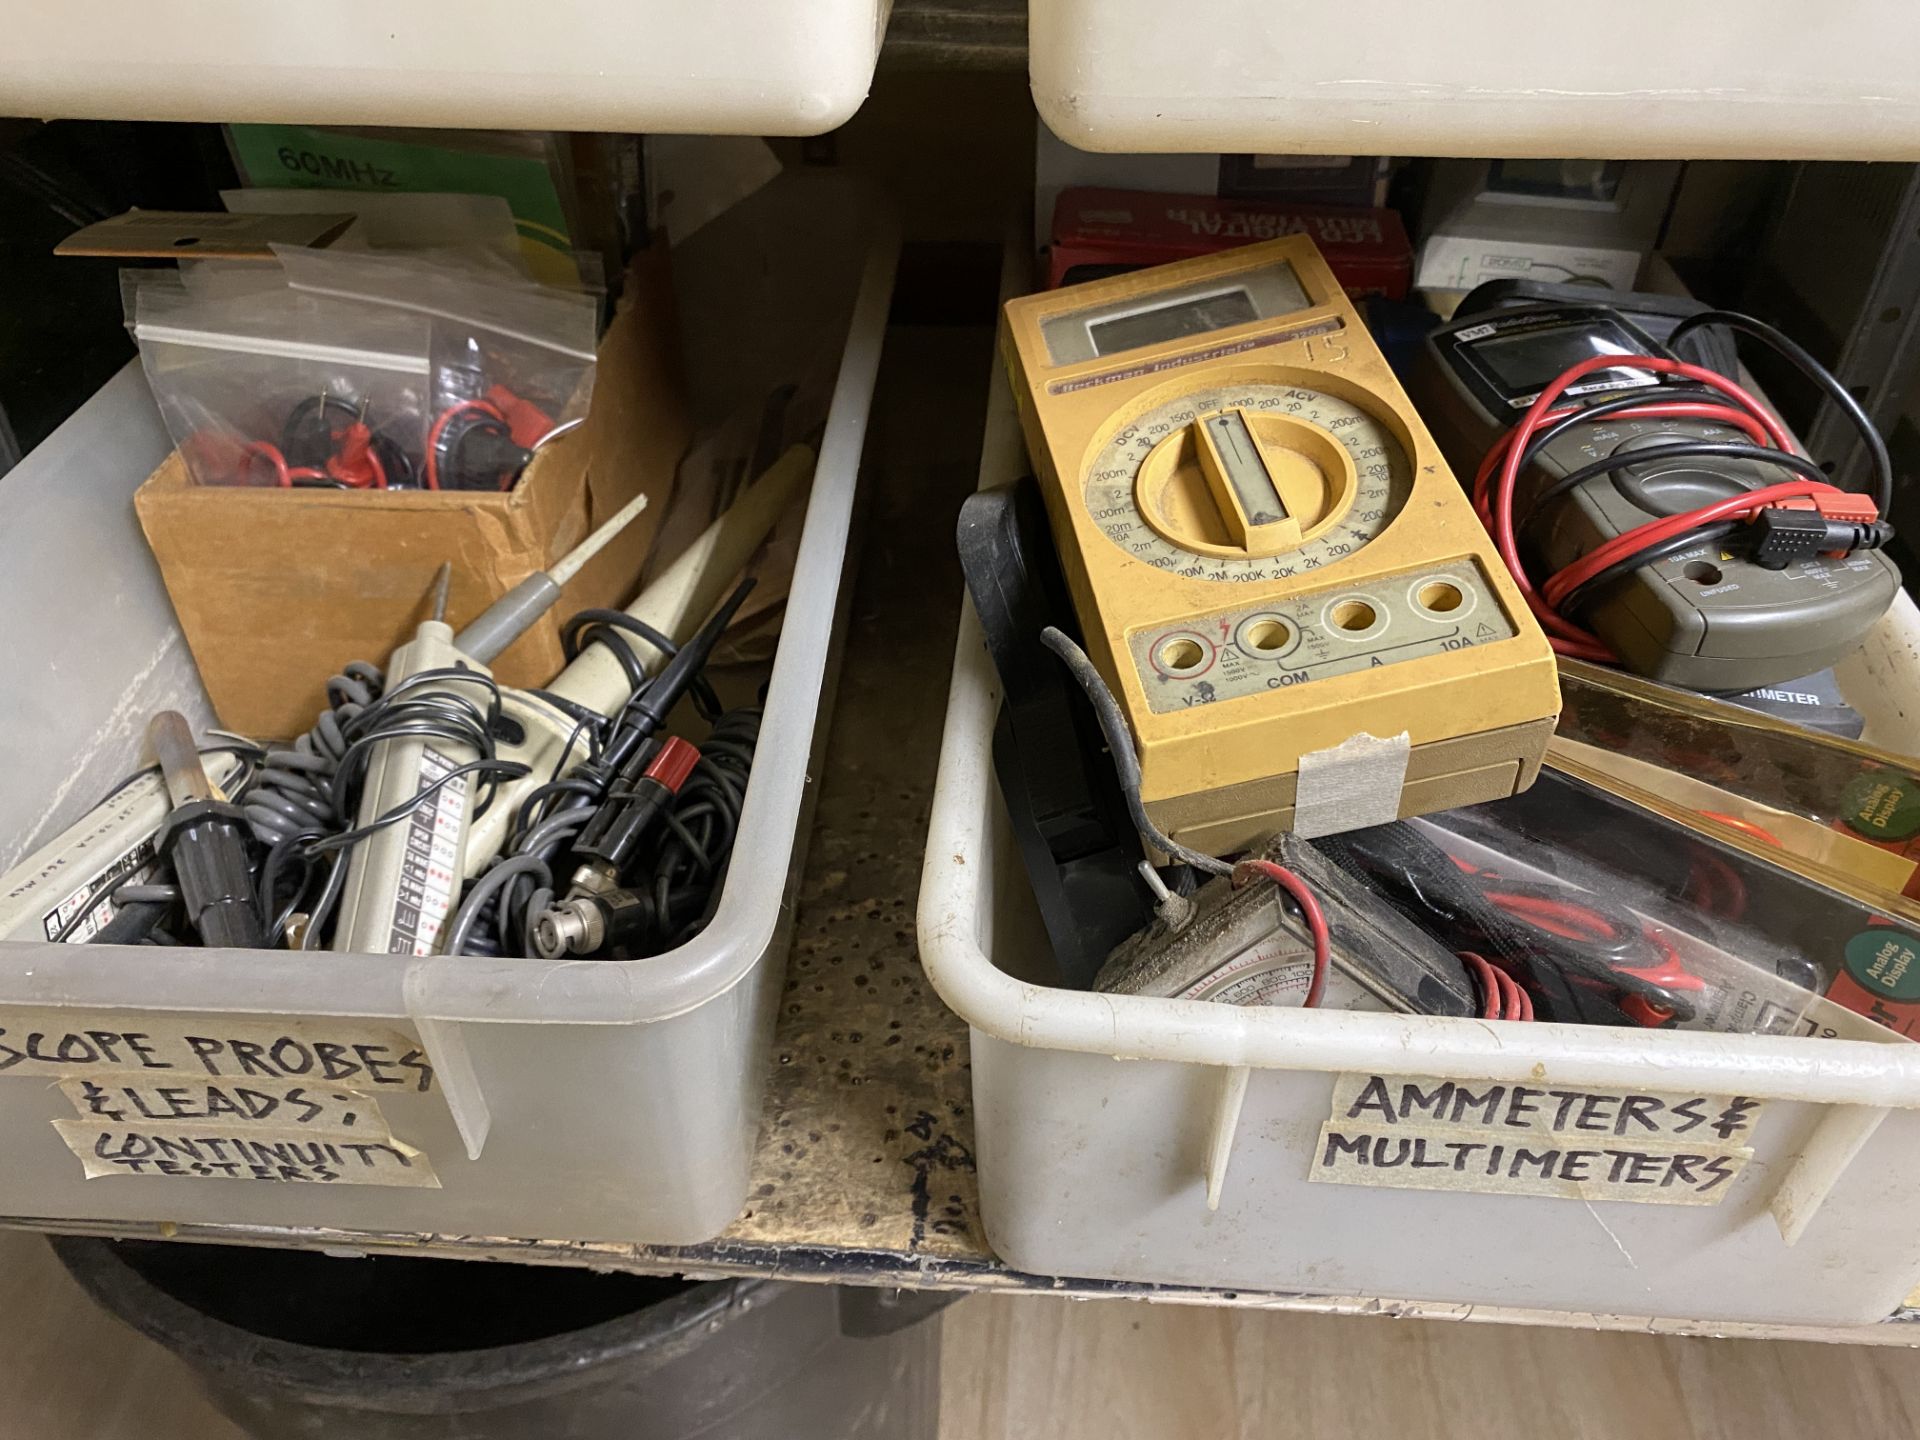 LOT - Multi Meters, Capacitors, Probes, Test Leads - Image 2 of 2